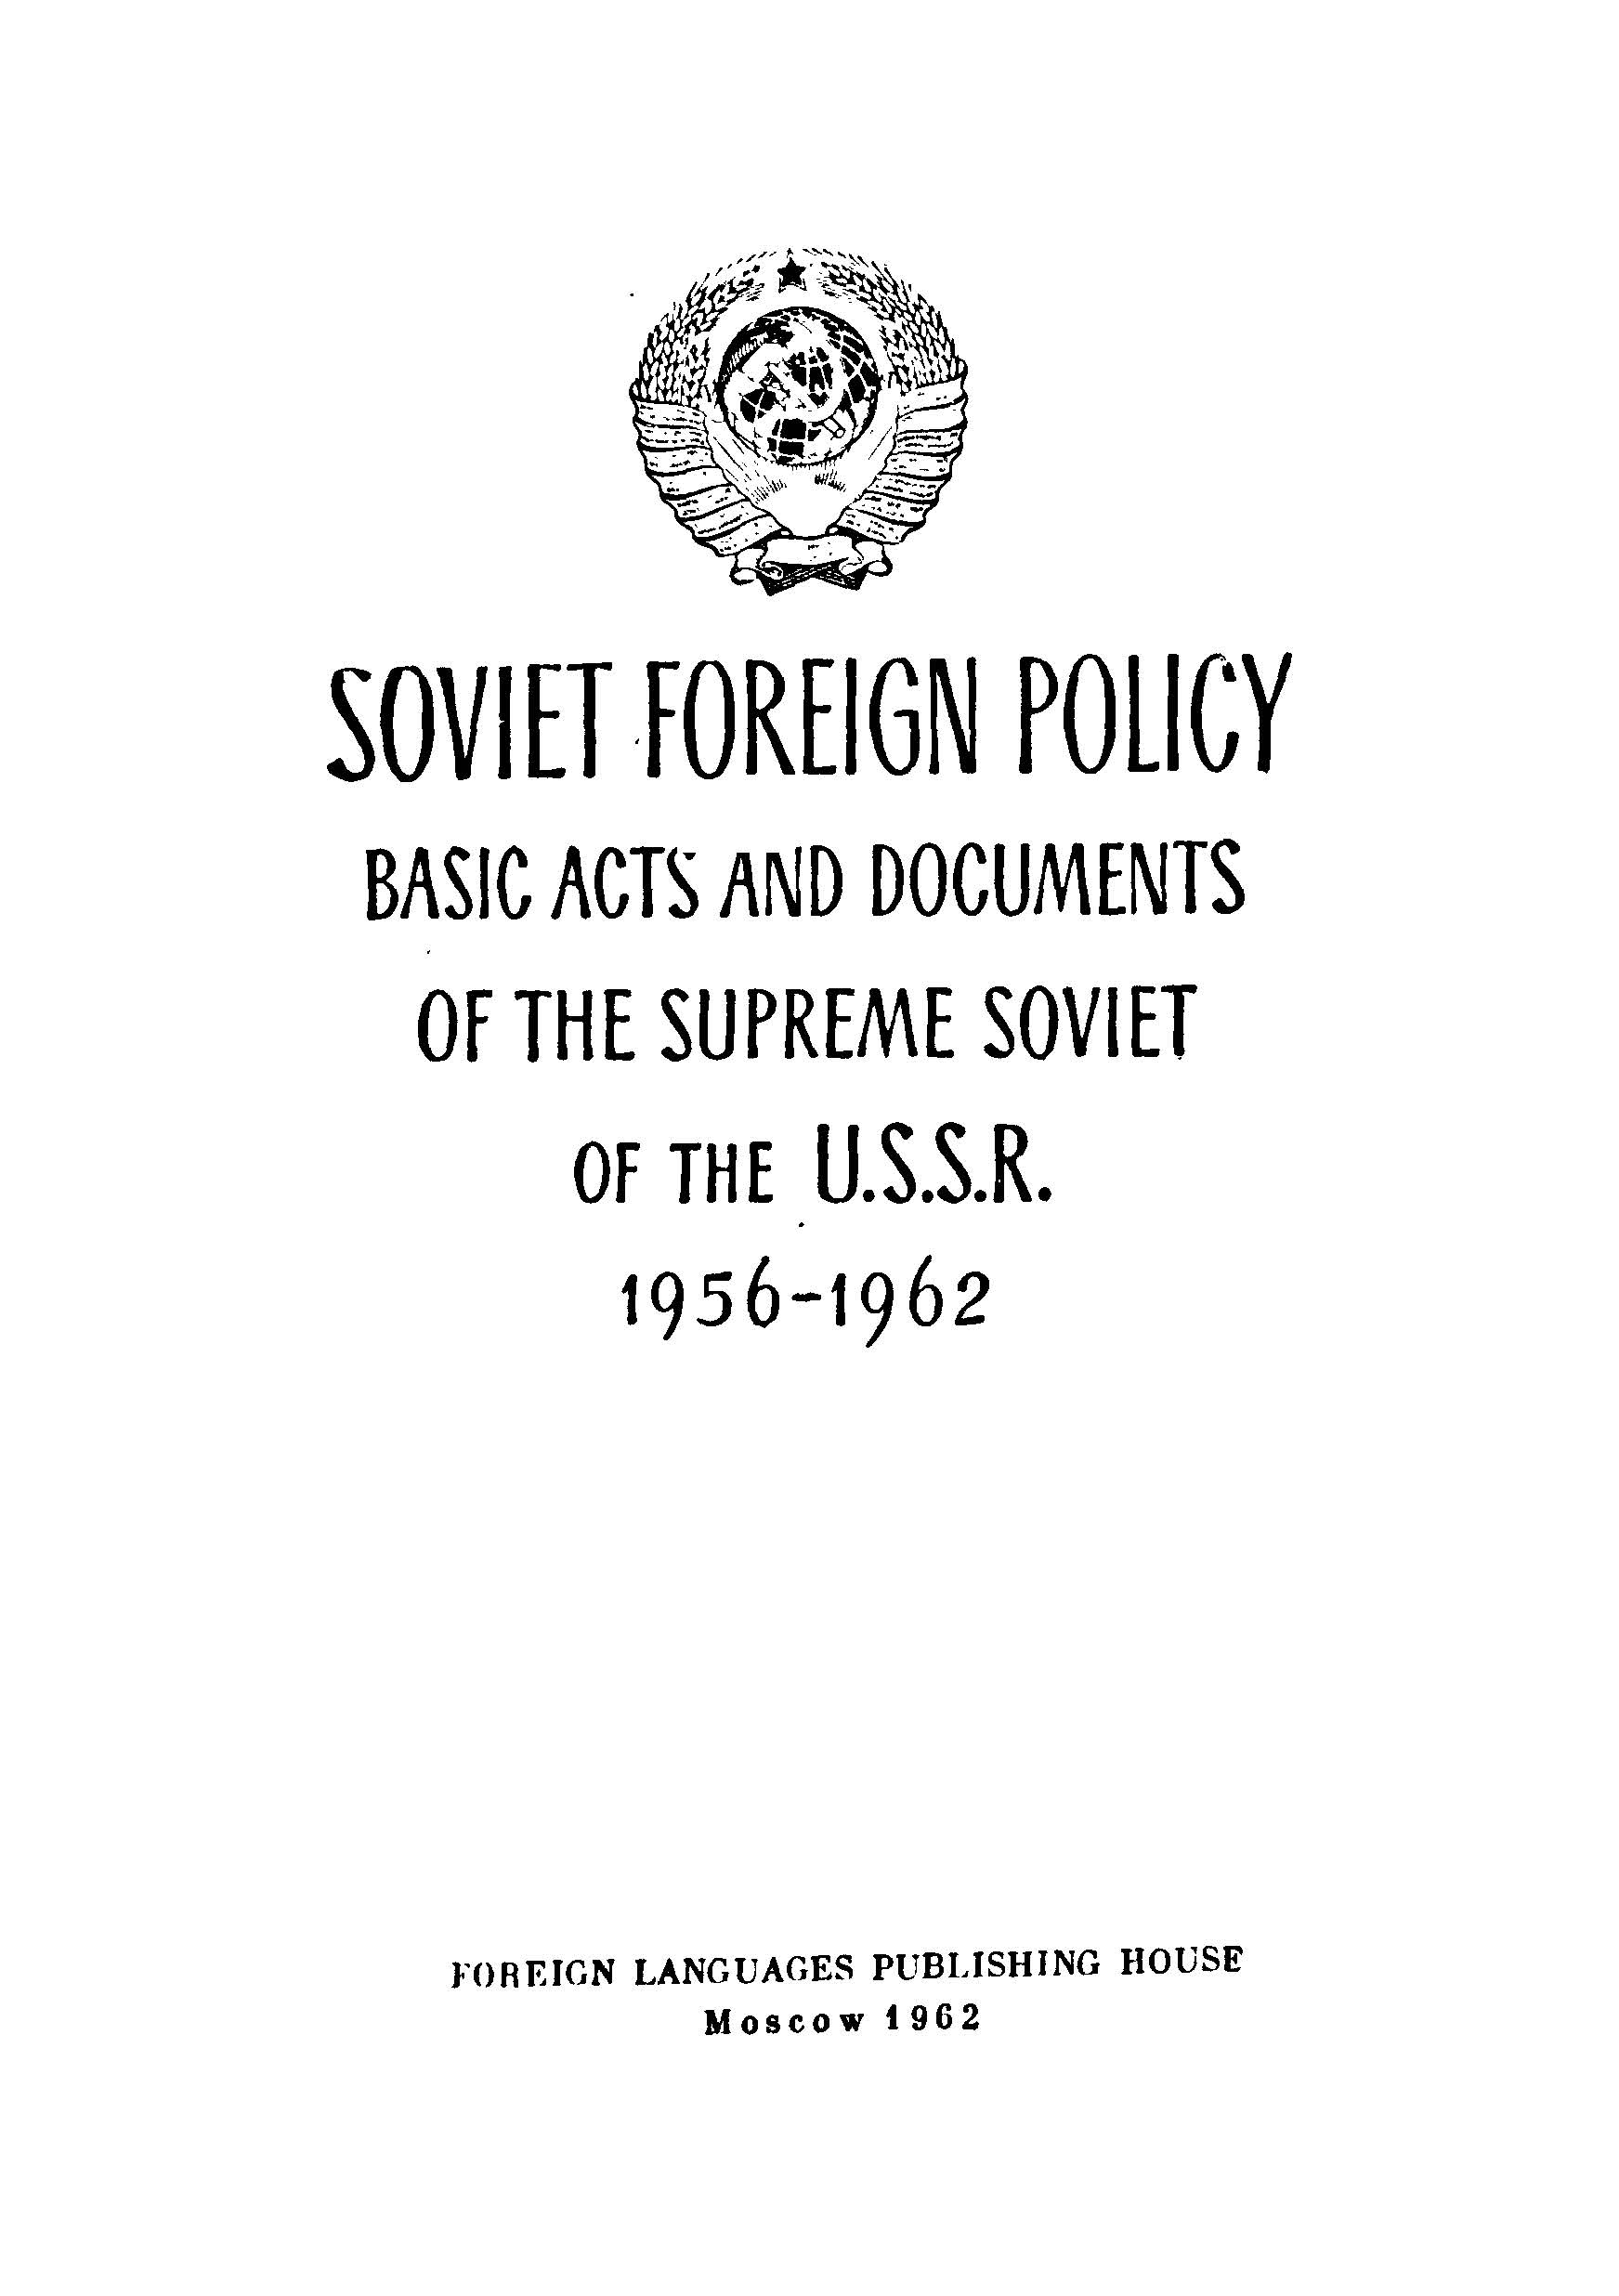 Soviet forelgn policy basic acts and documents of the supreme soviet of the U.S.S.r 1956-1962